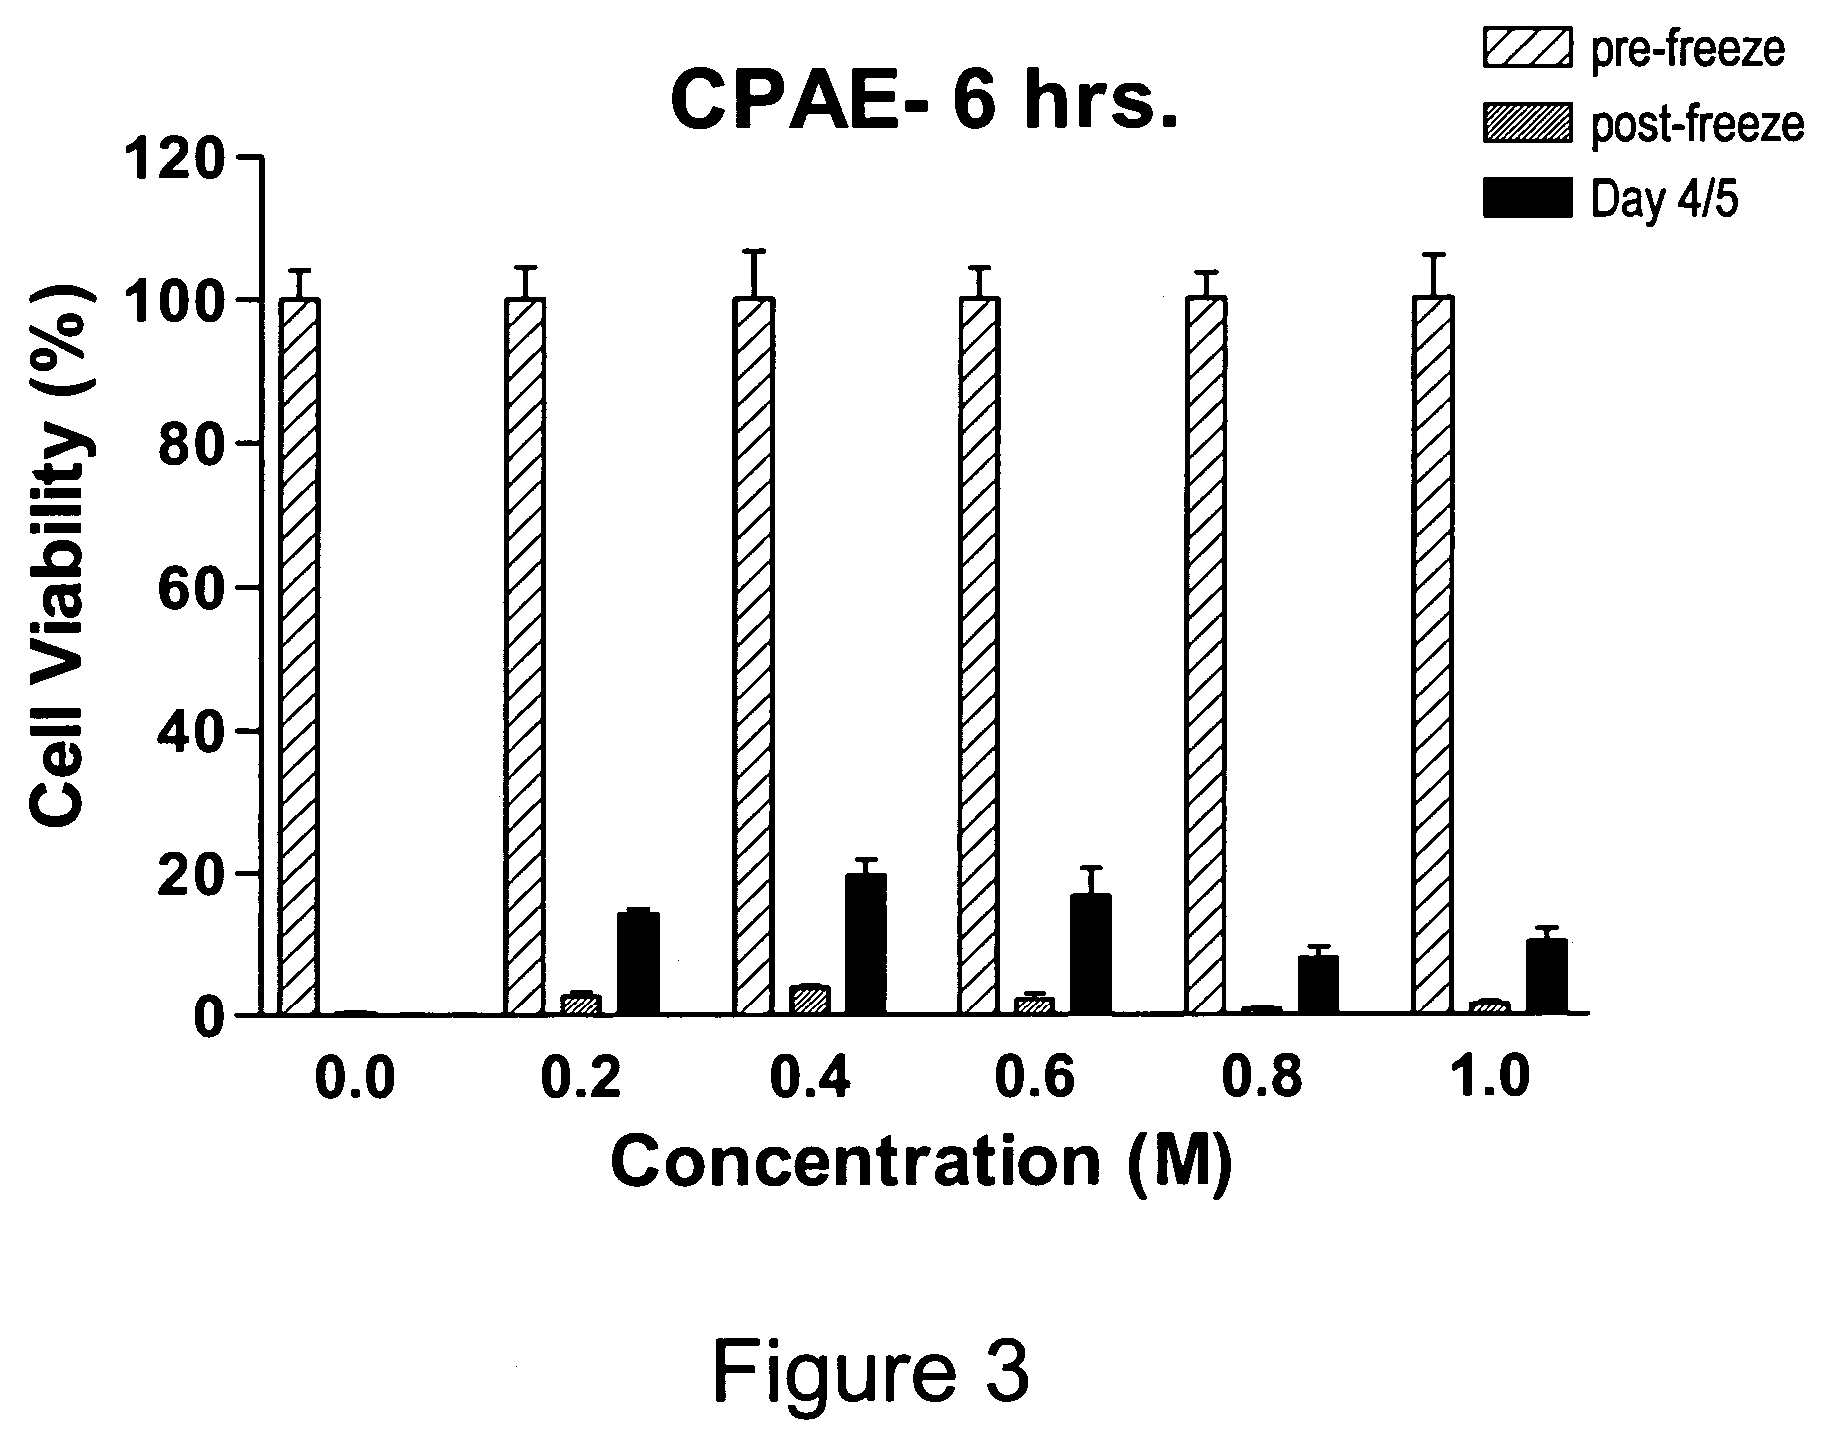 Method for treatment of cellular materials with sugars prior to preservation